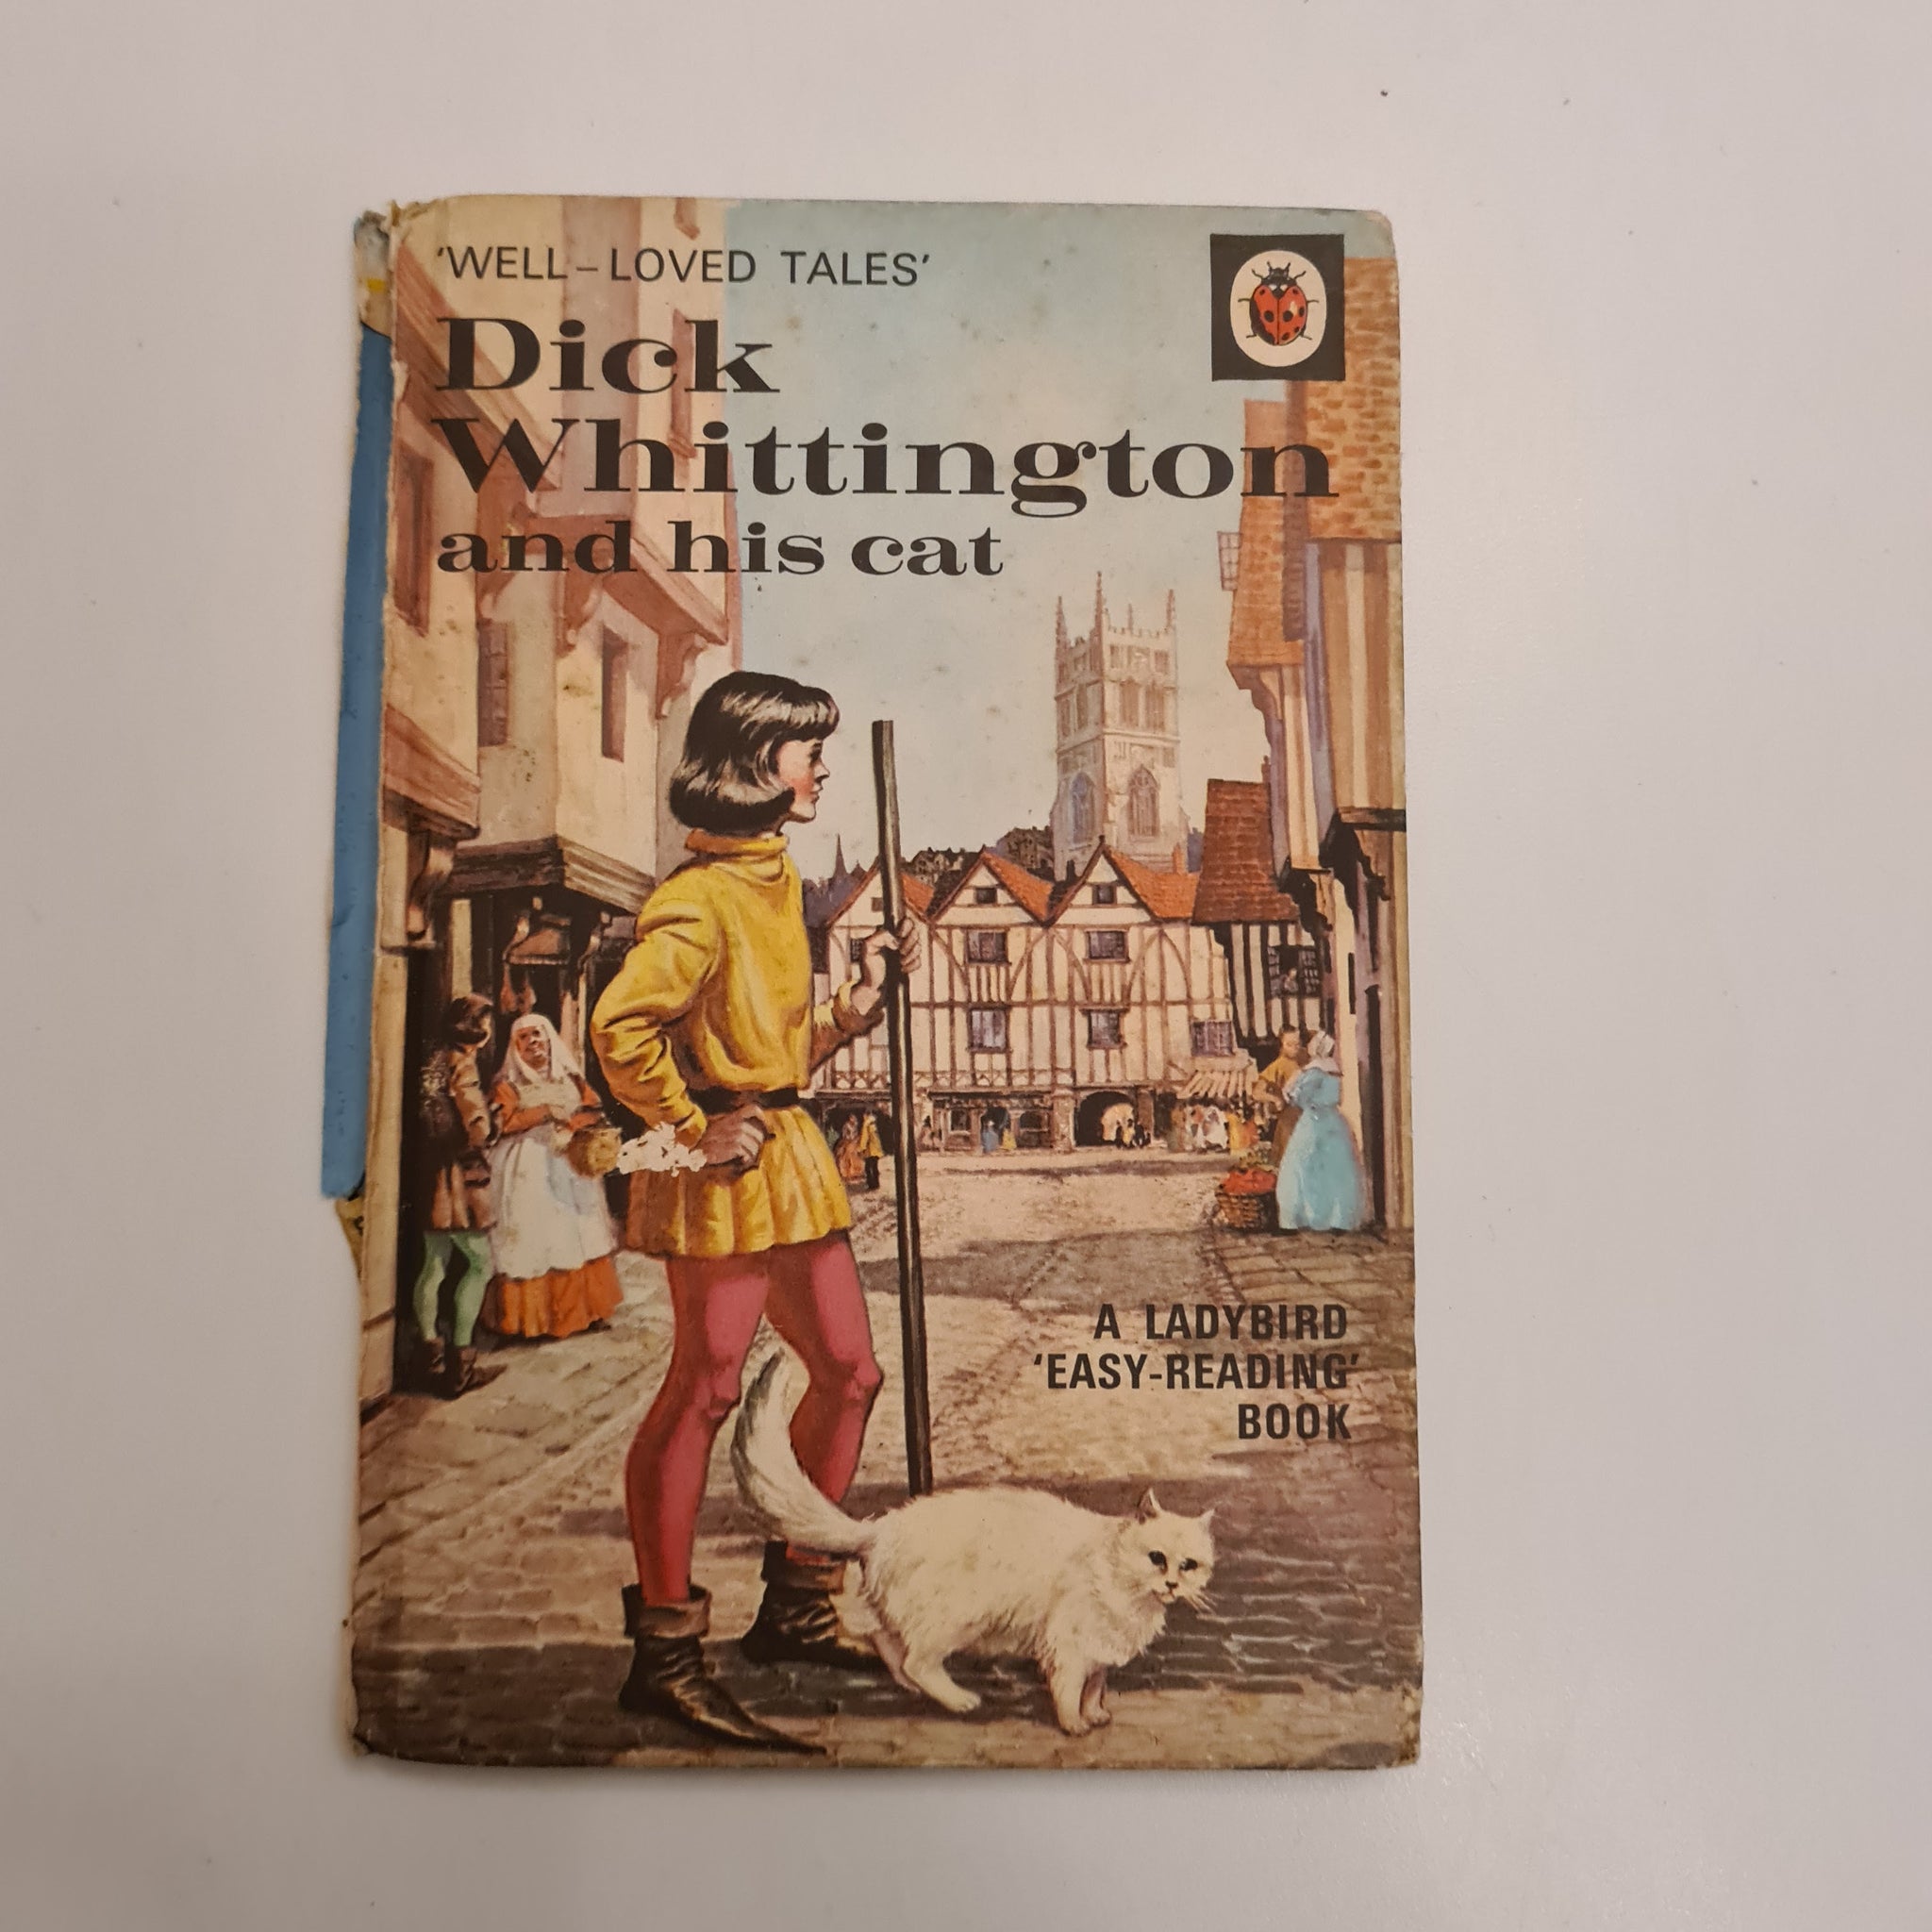 DICK WHITTINGTON and HIS CAT